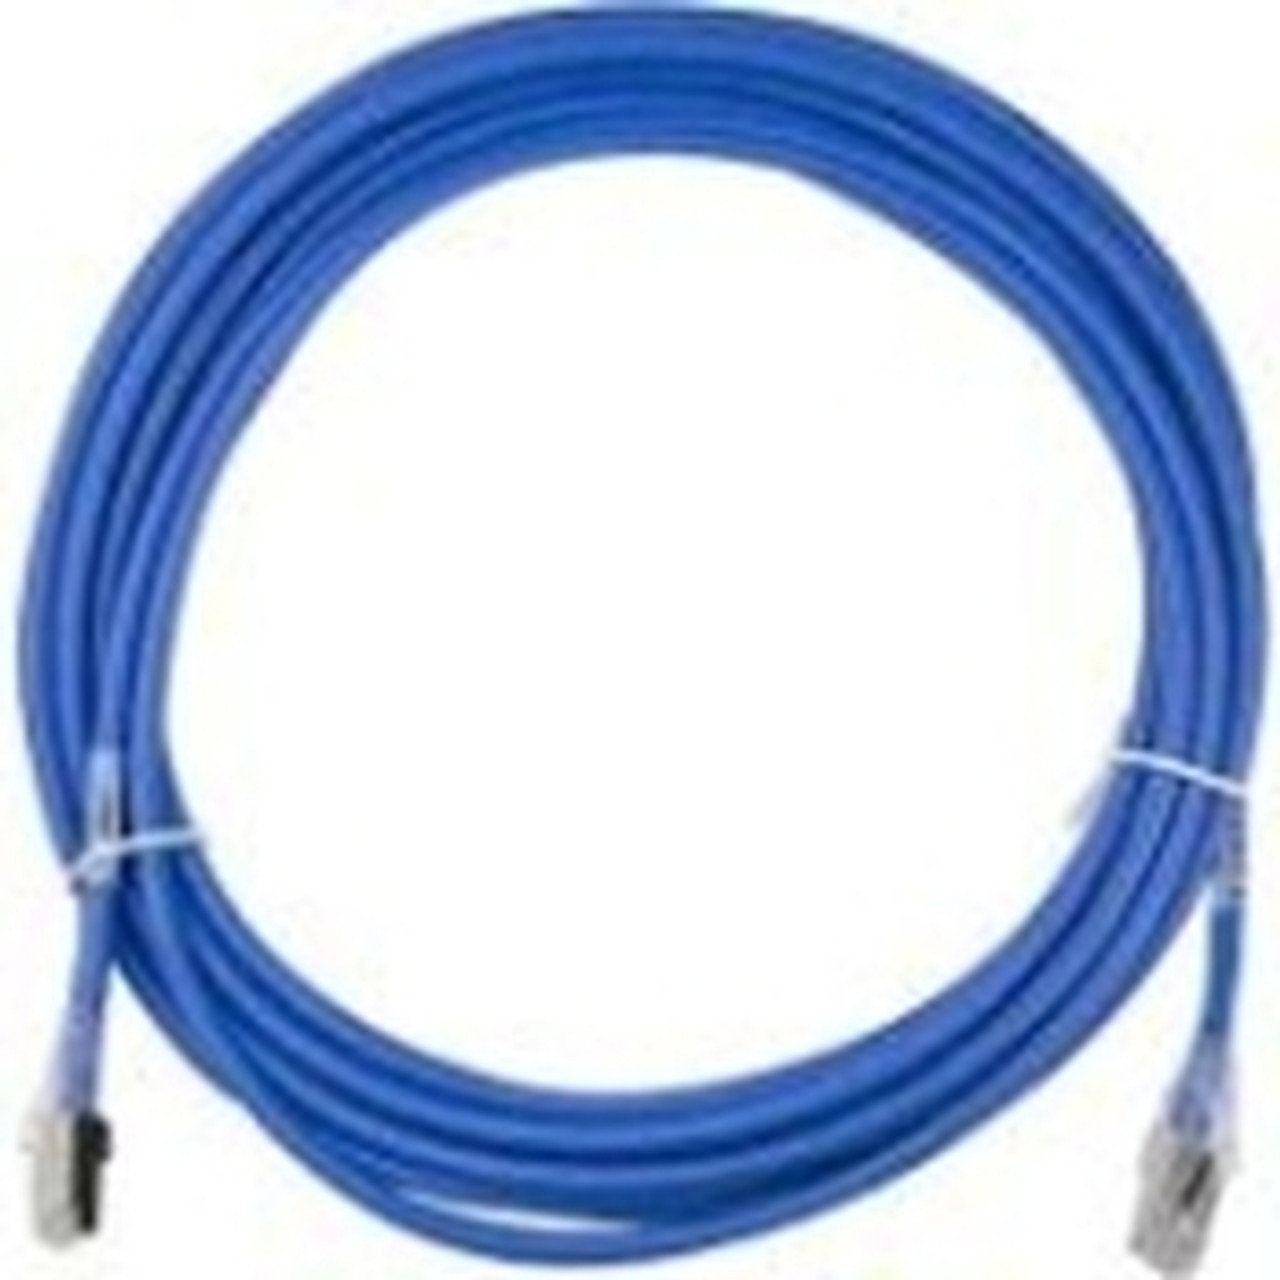 CBL-NTWK-0610 Supermicro Cat.6 Network Cable Category 6 for Network Device 18 ft 1 x RJ-45 Male Network 1 x RJ-45 Male Network